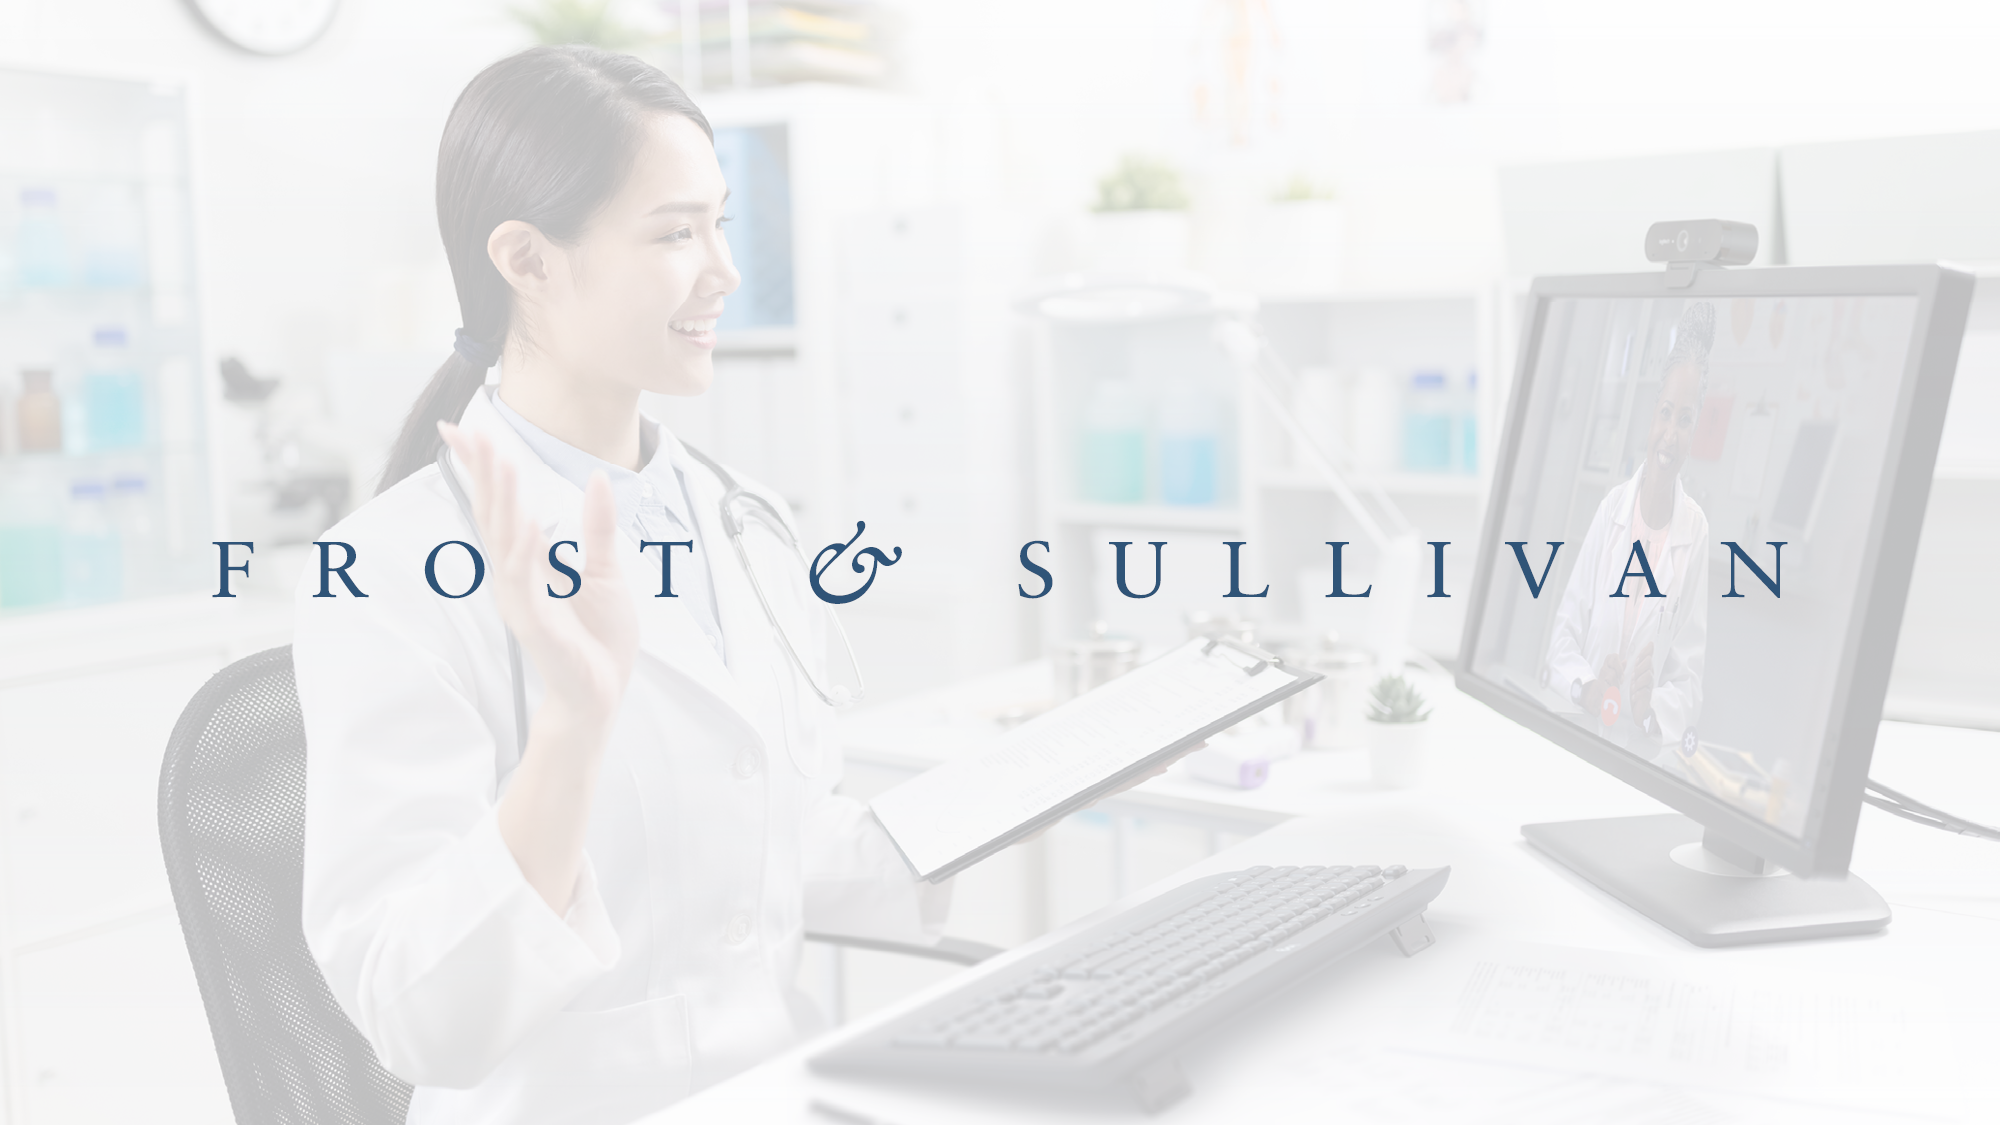 Frost and sullivan research to improve telehealth